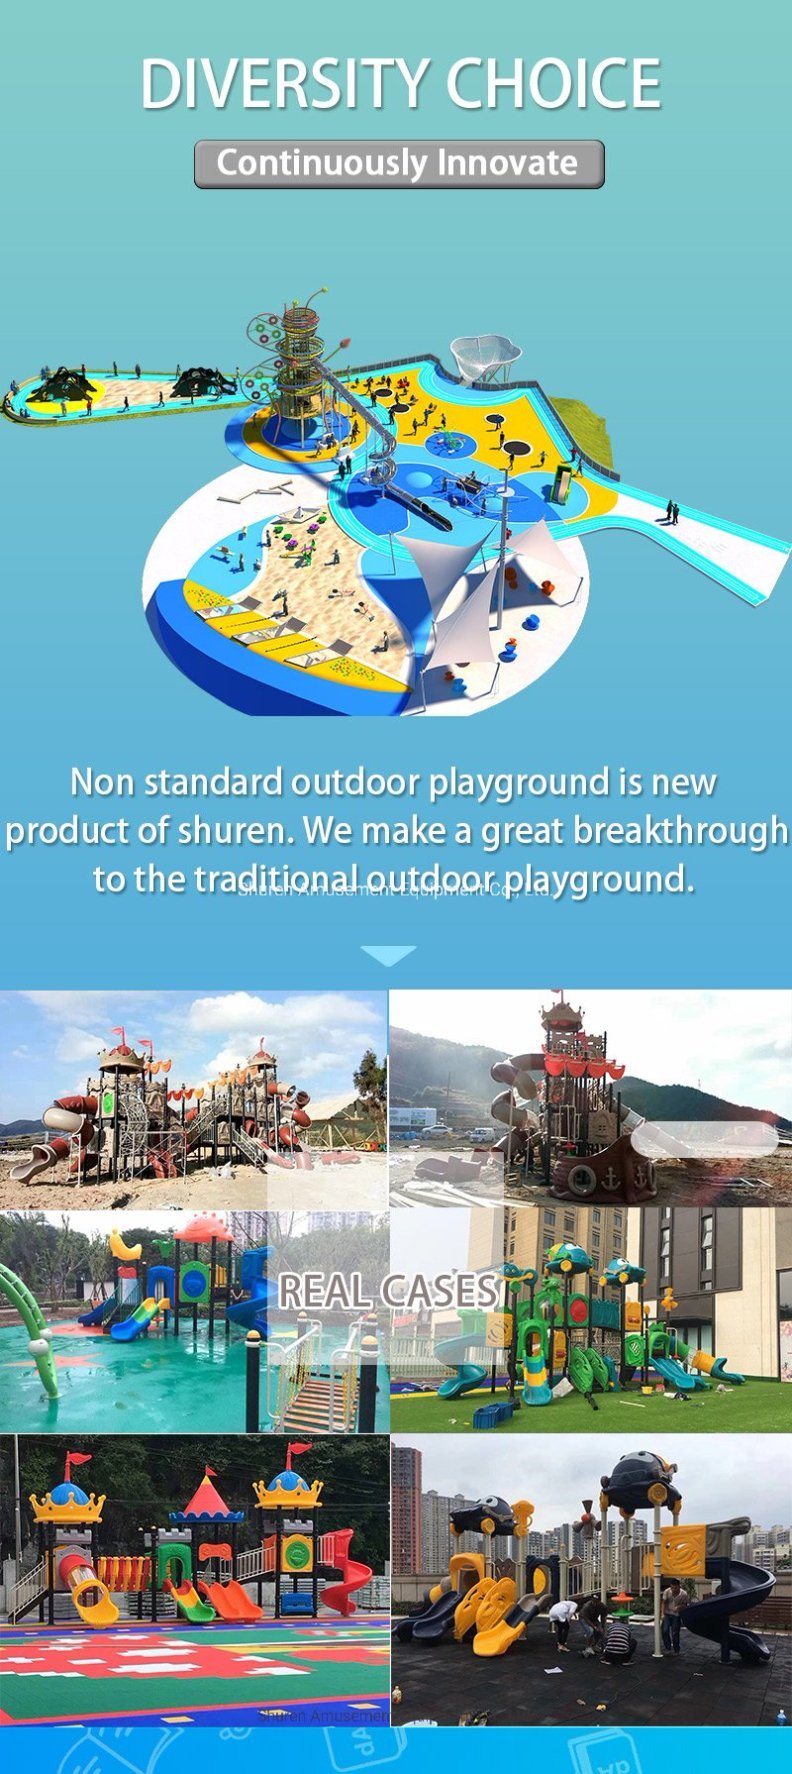 Walmart Outdoor Play Family Park with Slides Good for Children